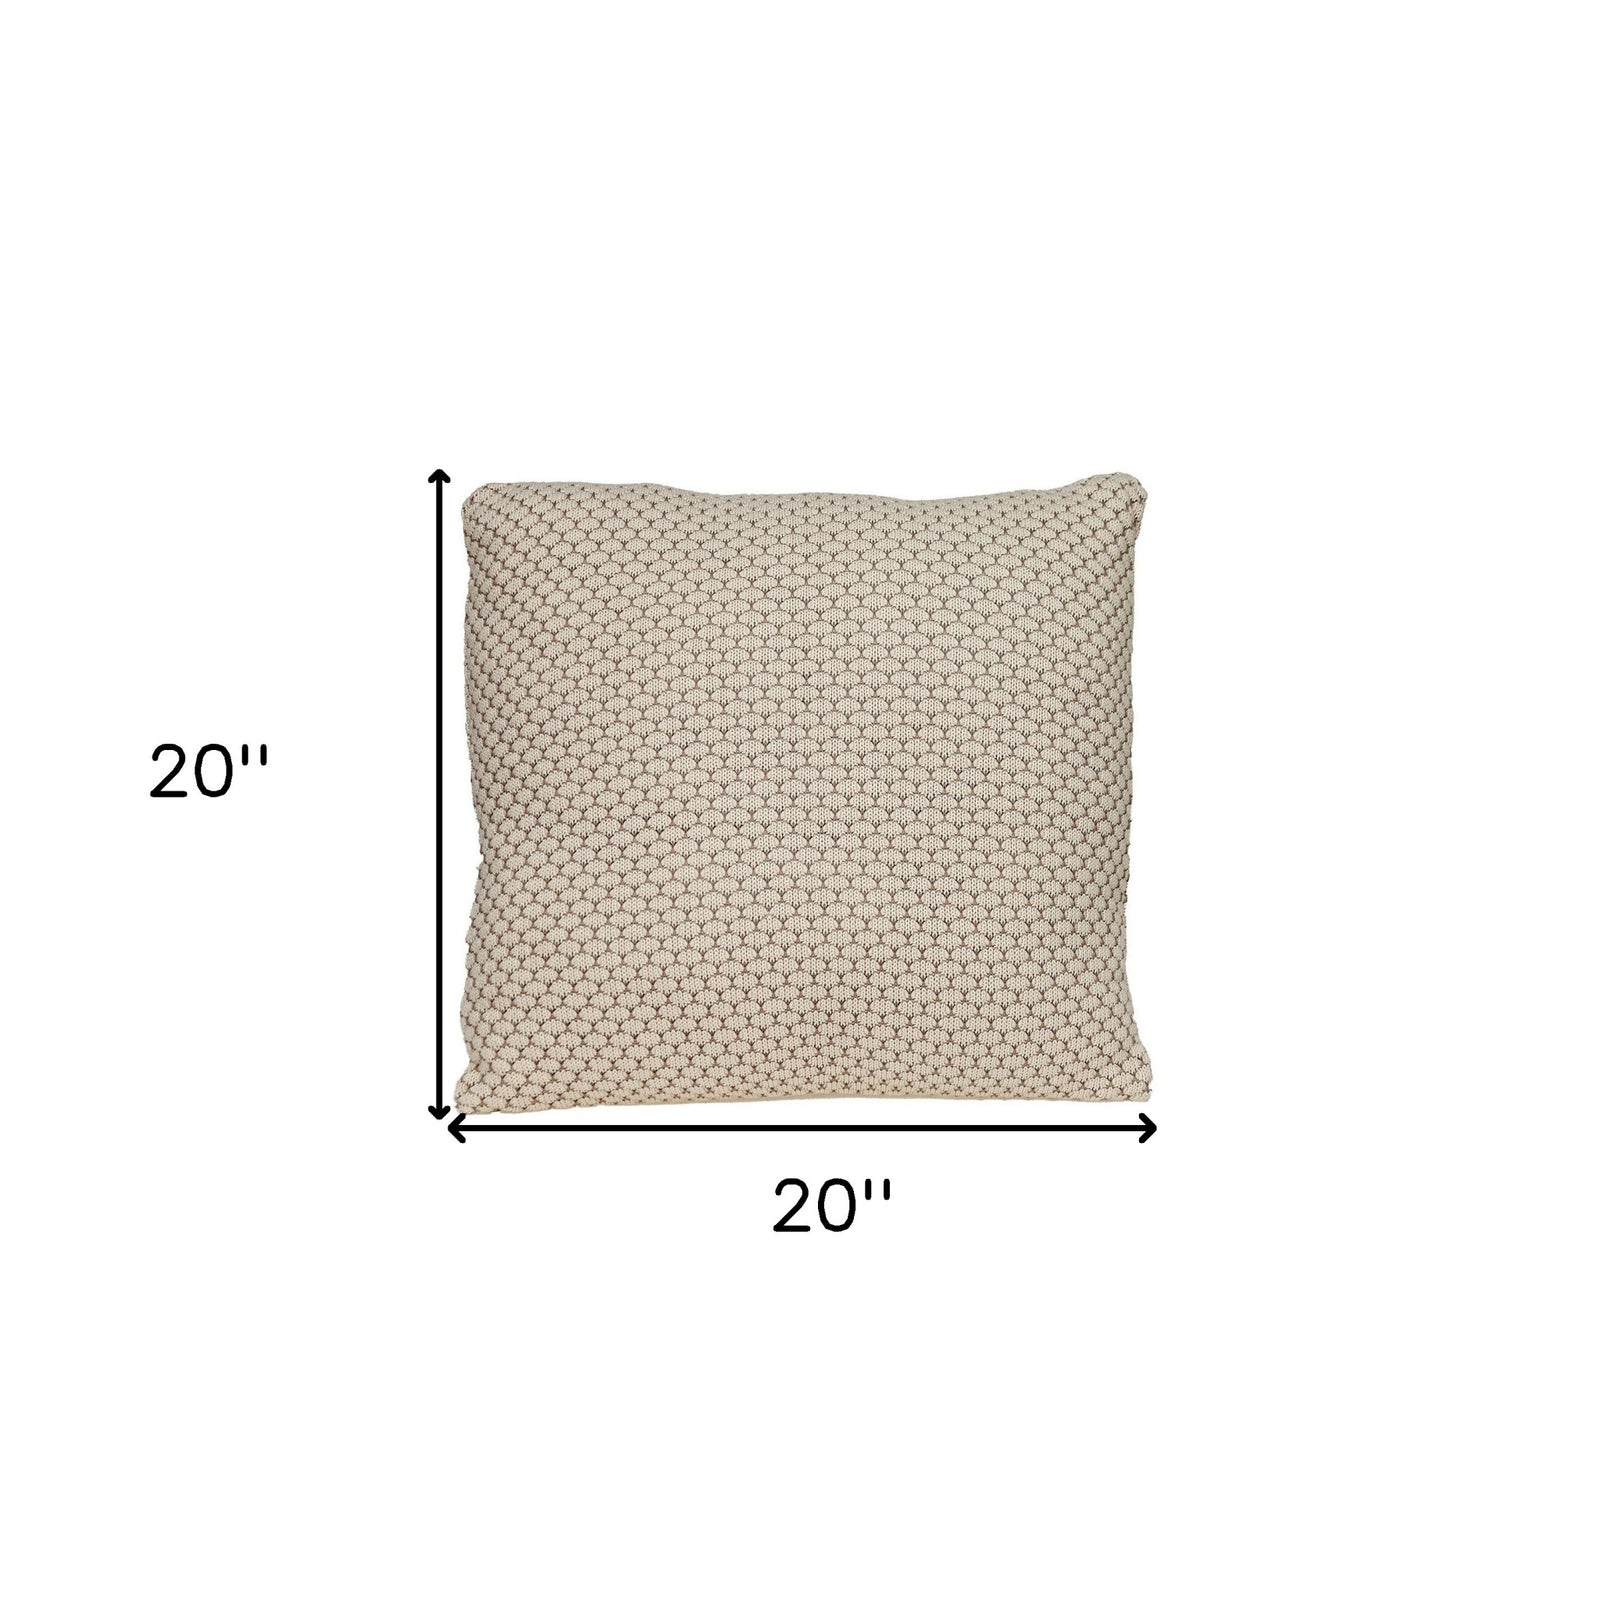 20" x 20" Beige and Pink Woven Square Accent Throw Pillow